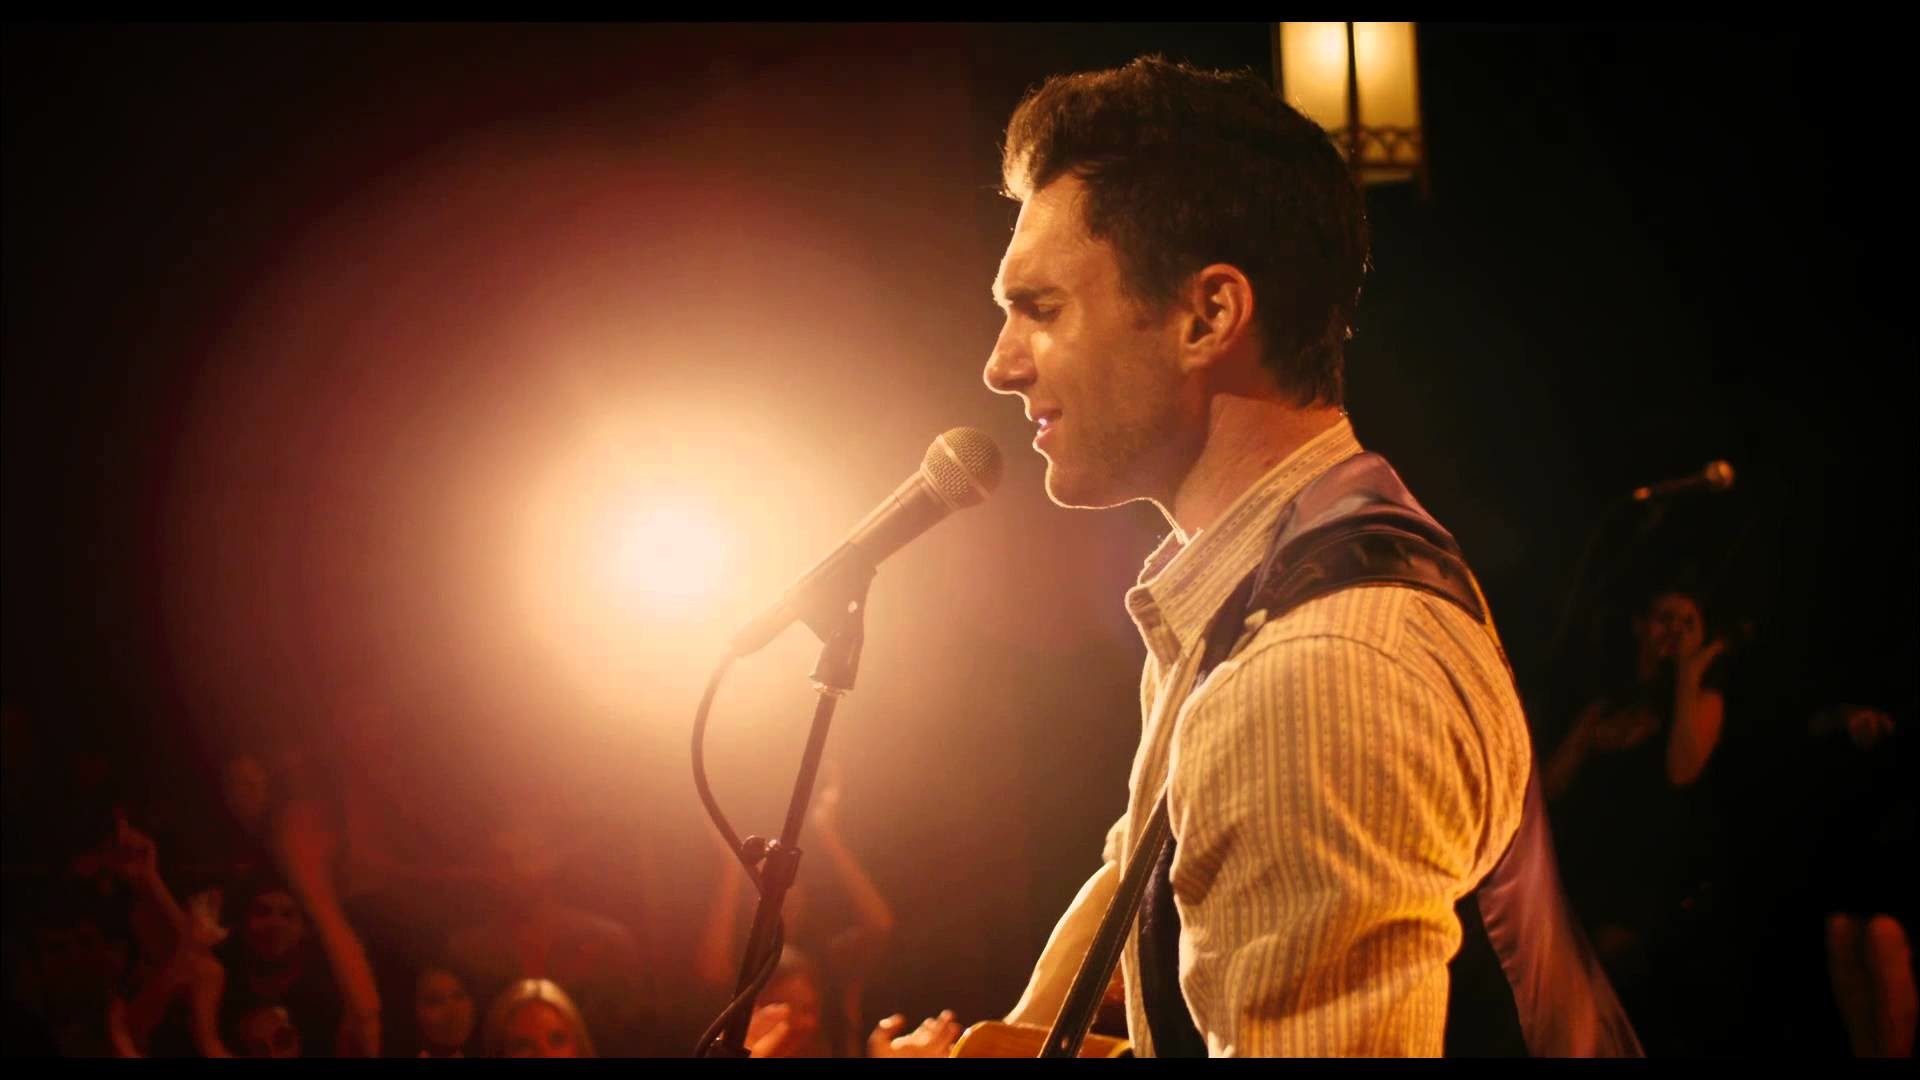 1920x1080 New Song "Lost Stars" Performed by Adam Levine - The Weinstein Company -  YouTube